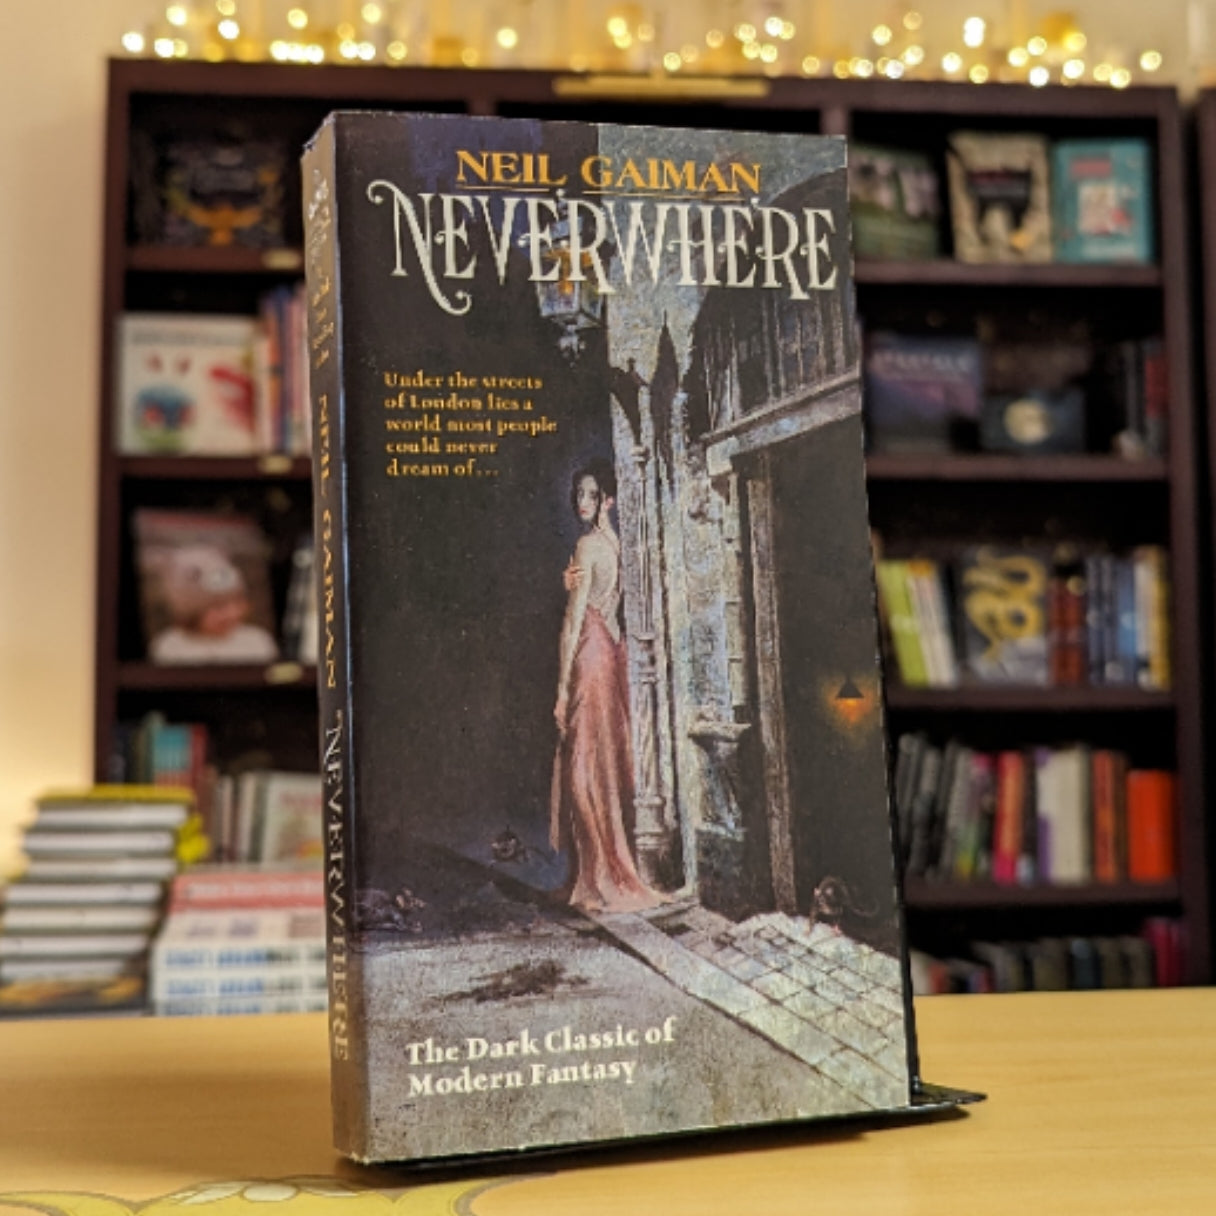 Neverwhere: Author's Preferred Text